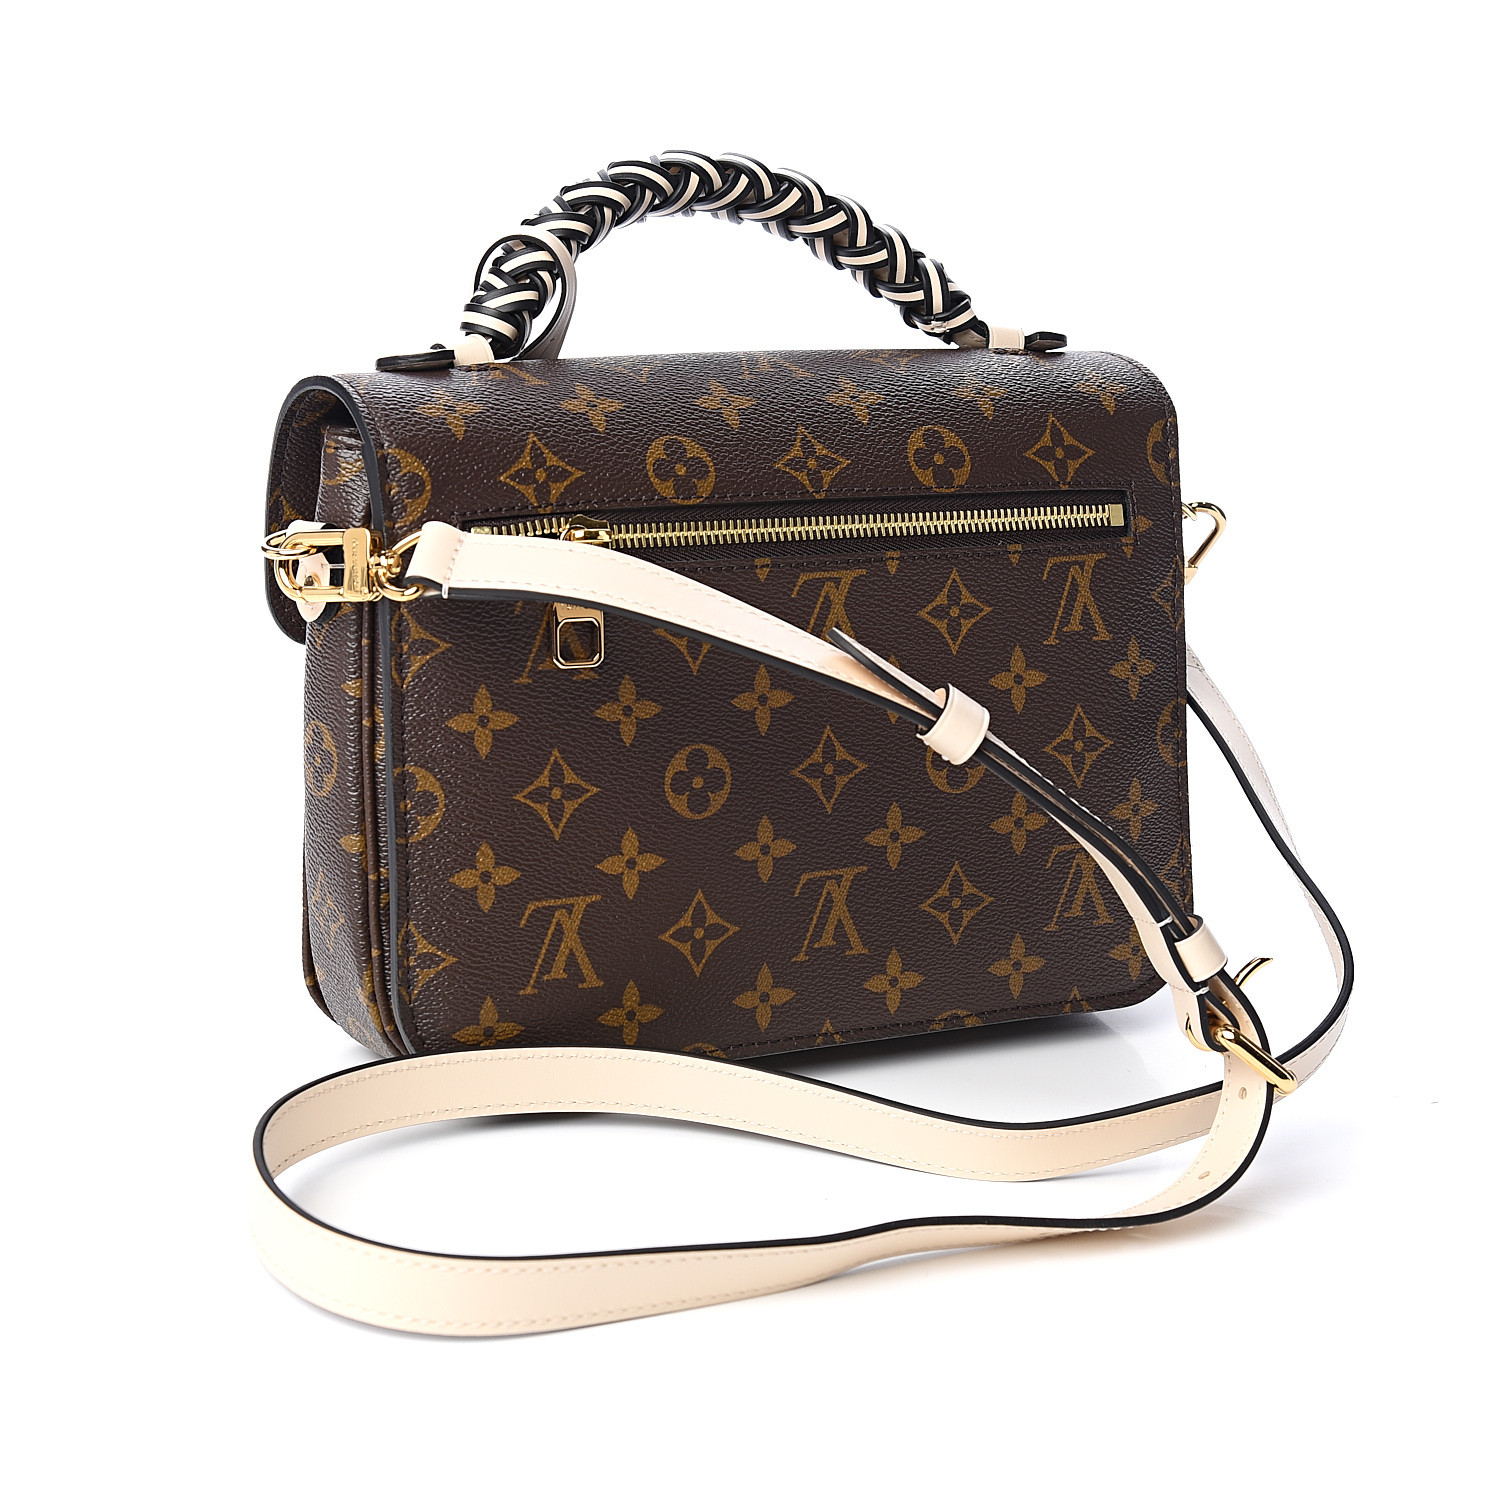 Louis Vuitton to launch Monogrammed Metis in the New Year - Luxurylaunches